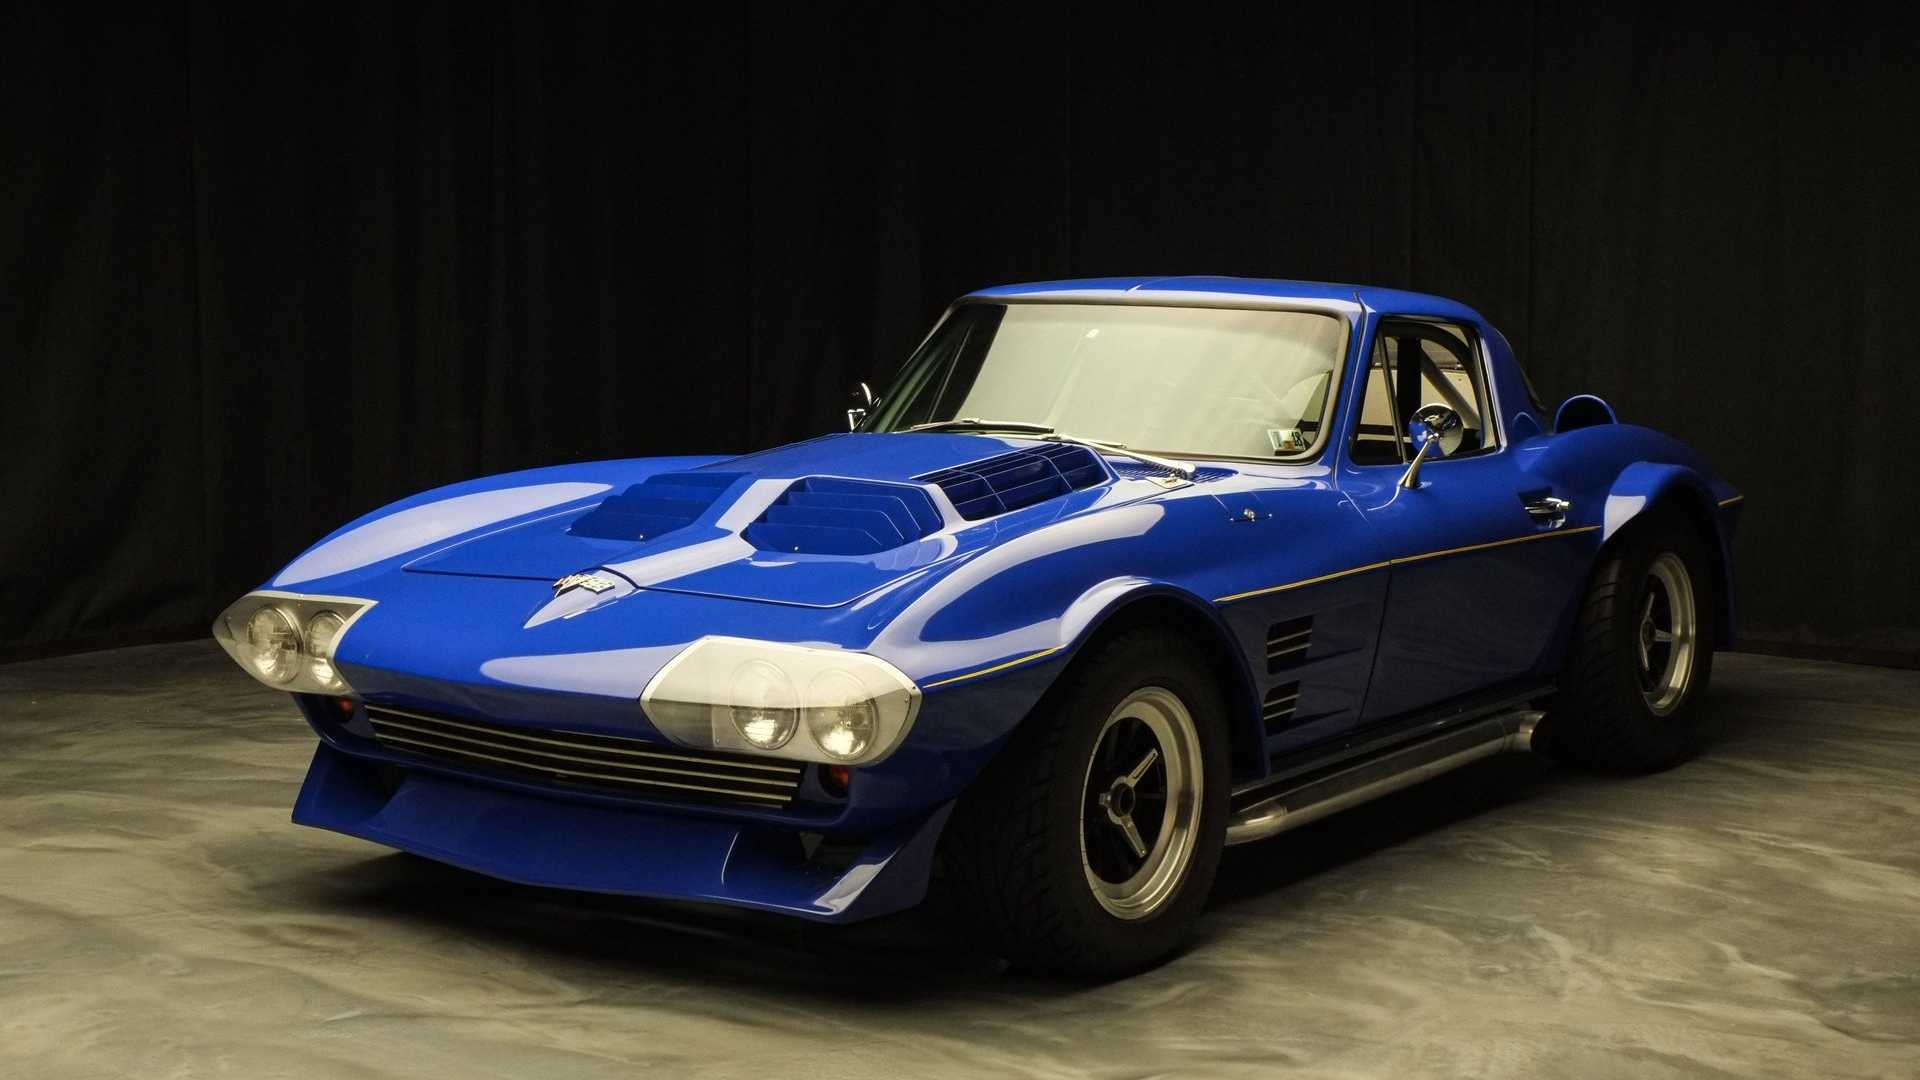 Clear Garage Space For This Custom 1963 Chevy Corvette